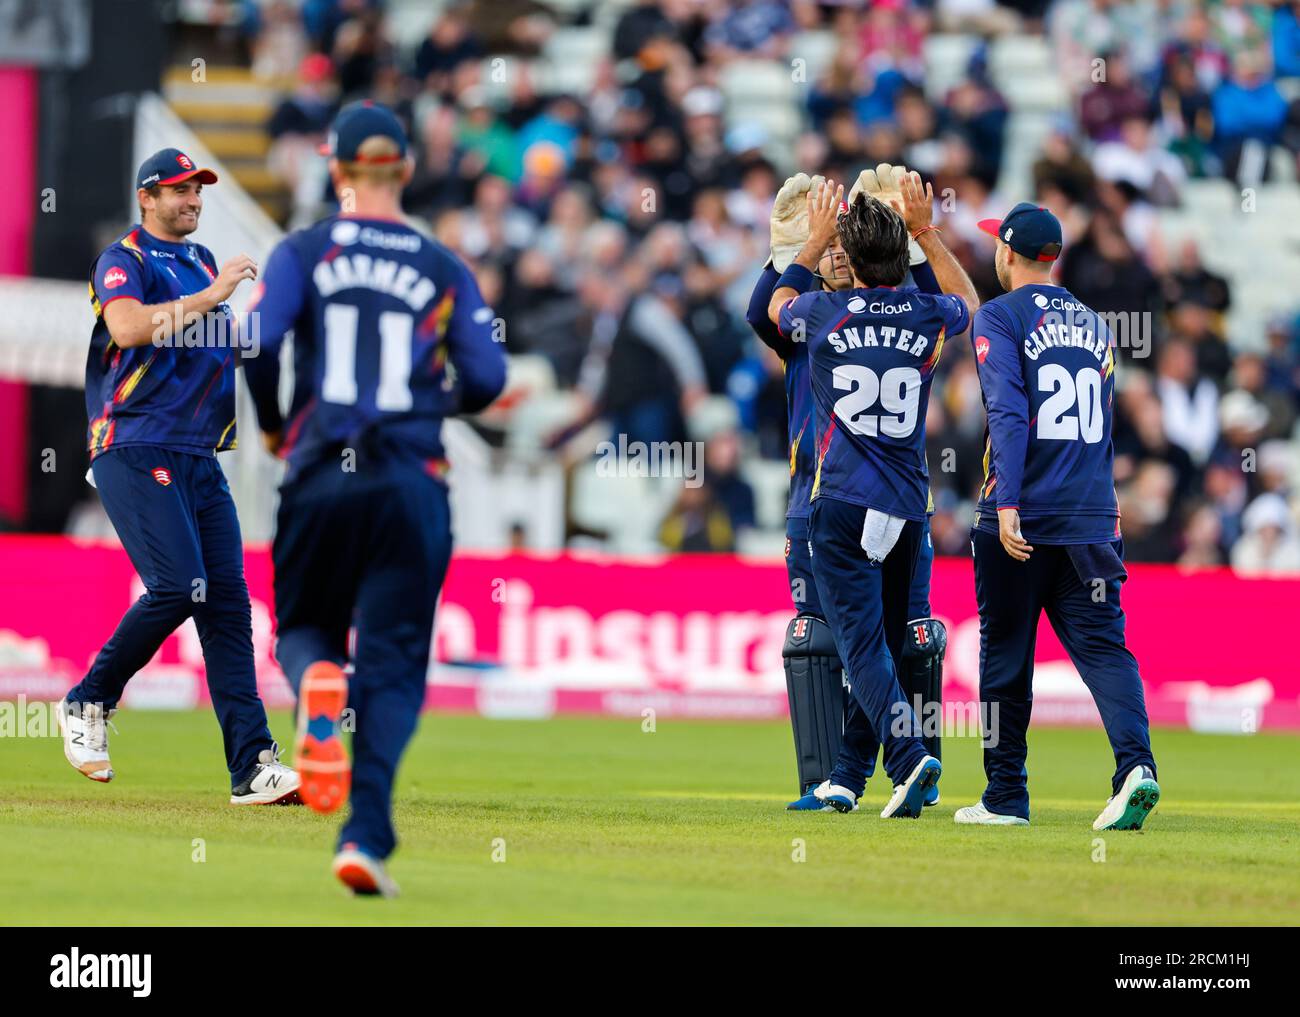 Edgbaston, Birmingham, UK. 15th July 2023; Edgbaston, Birmingham, England: Vitality Blast T20 League Cricket Final, Somerset versus Essex: Shane Snater of Essex Eagles (29) is congratulated by team mates after taking the wicket of Tom Banton of Somerset for 20 Credit: Action Plus Sports Images/Alamy Live News Stock Photo